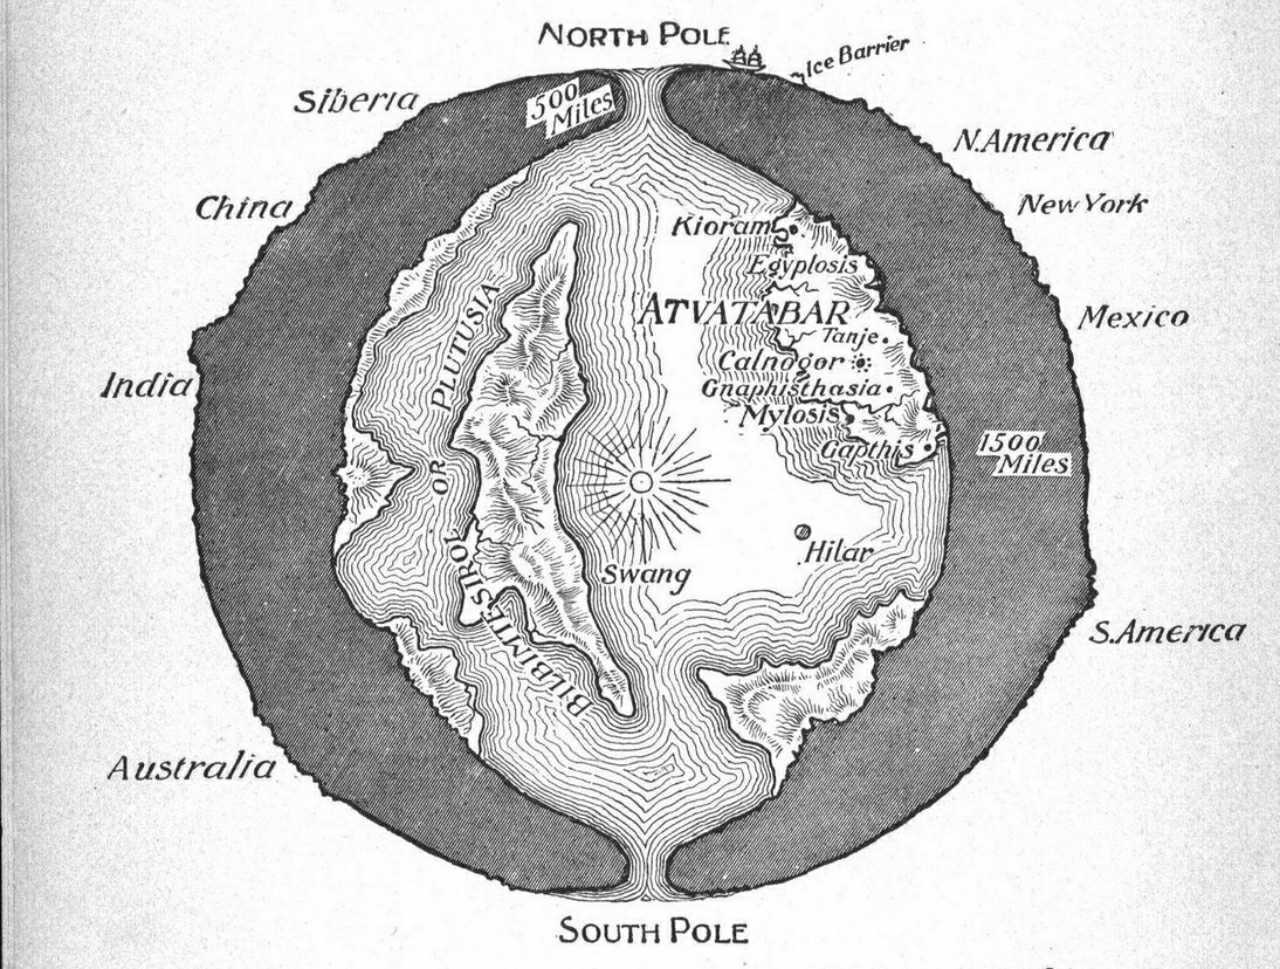 A cross-sectional drawing of the planet Earth showing the "Interior World" of Atvatabar, from William R. Bradshaw's 1892 science-fiction novel The Goddess of Atvatabar